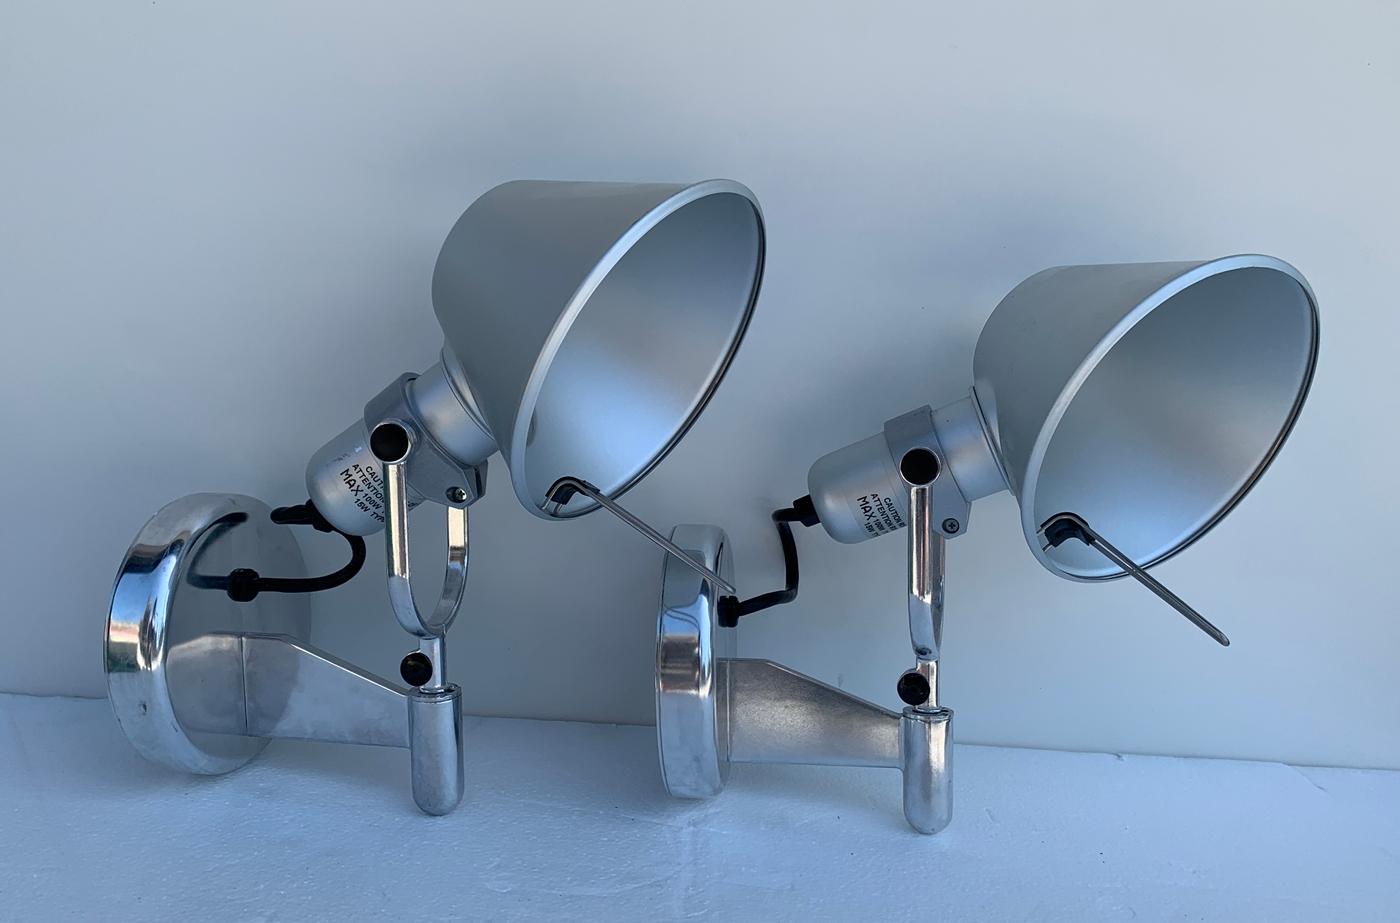 Pair of Tolomeo spot wall lights designed Michele De Lucchi Giancarlo Fassina and manufactured by Artemide.

An extension to the iconic Tolomeo family, Tolomeo wall spot combines the head of the Tolomeo table lamp with a wall support to allow for